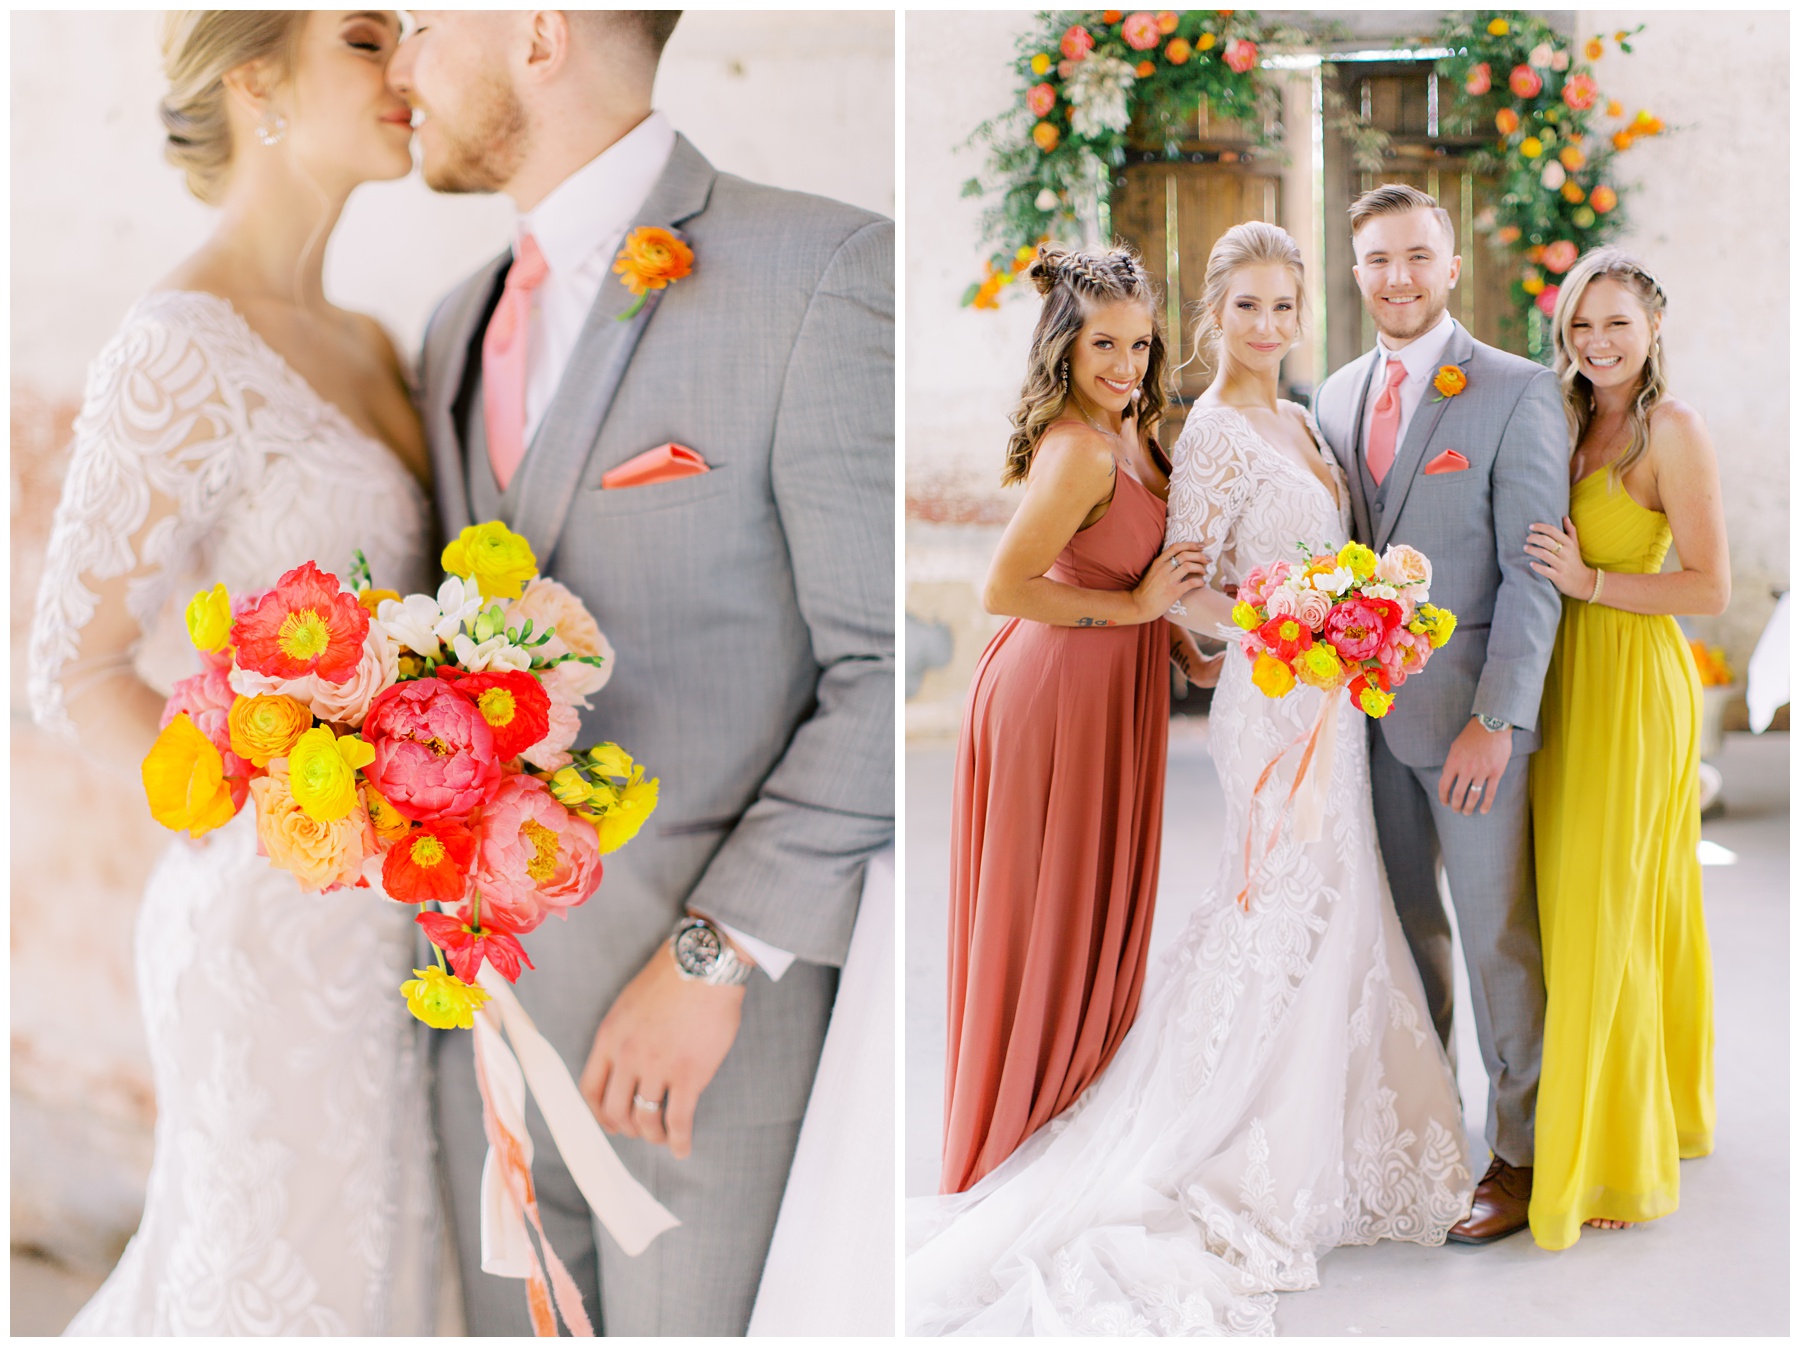 bride and groom kiss with bridesmaids in bright dresses next to them 